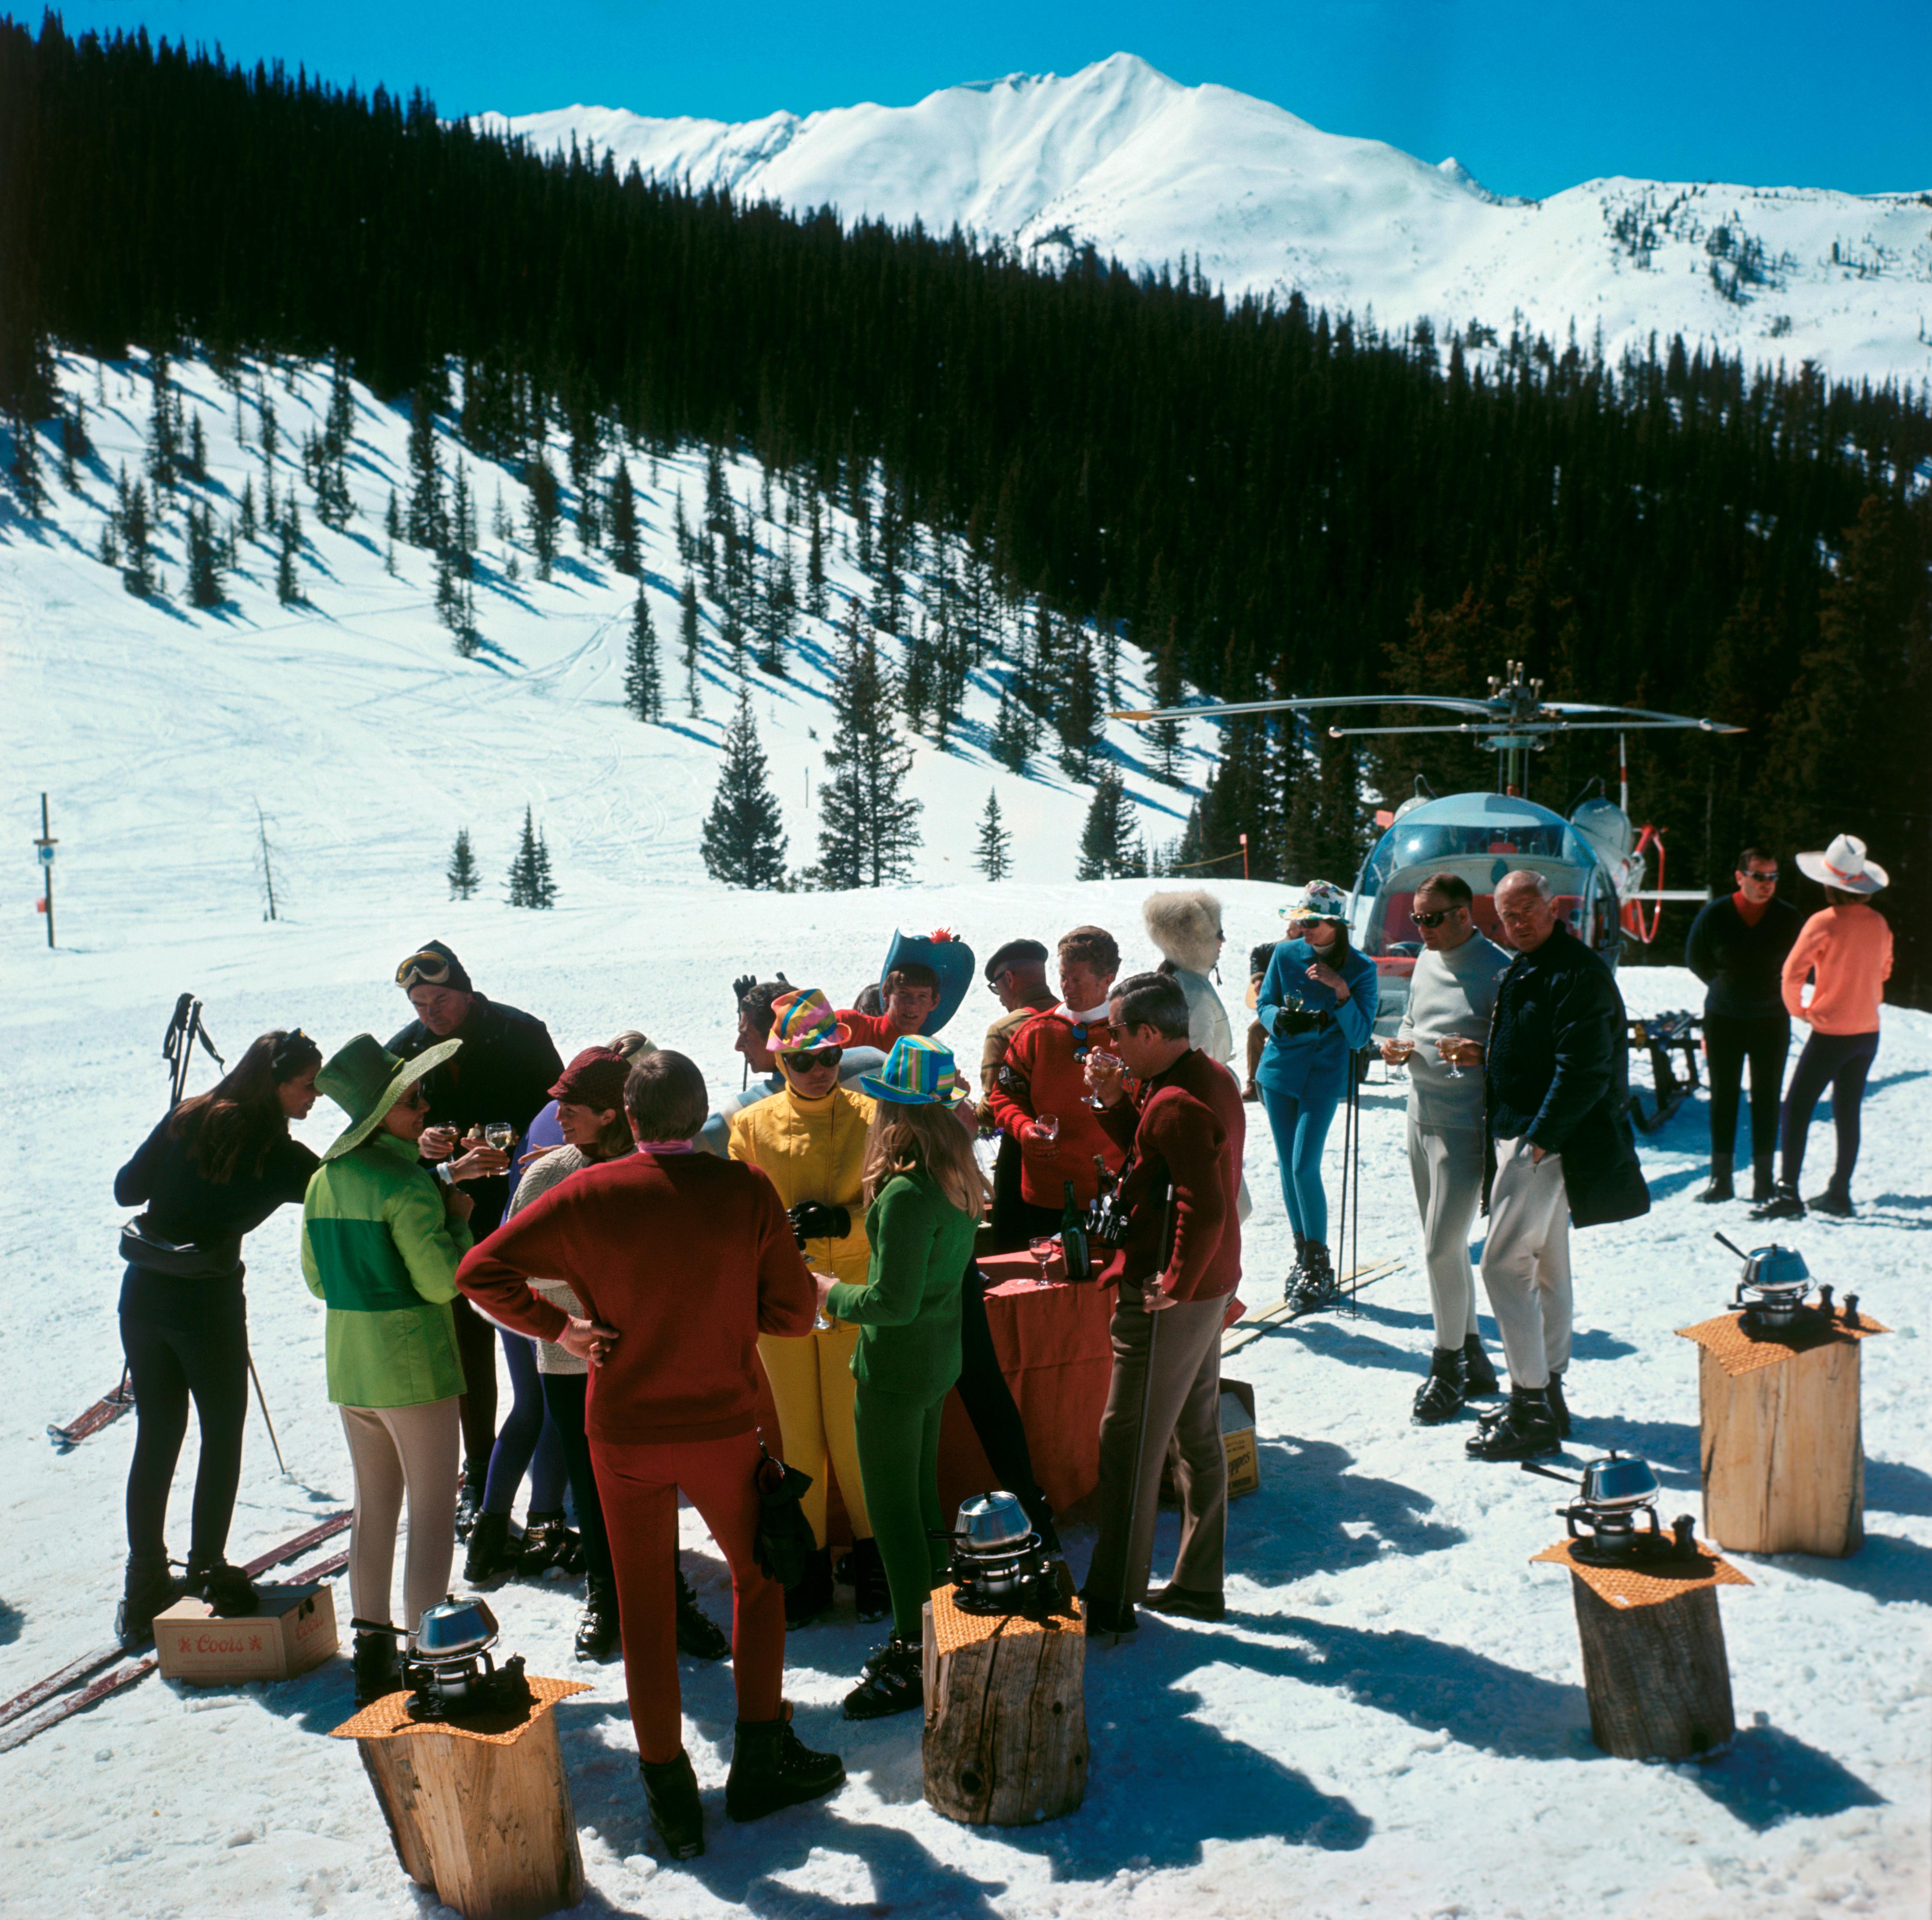 Snowmass Picnic
1967
Chromogenic Lambda Print
Estate edition of 150

1967: A stand-up fondue picnic for skiers at Snowmass-at-Aspen, Colorado which has more than fifty miles of trails and snowfields. The village was opened in 1967. The ski picnic